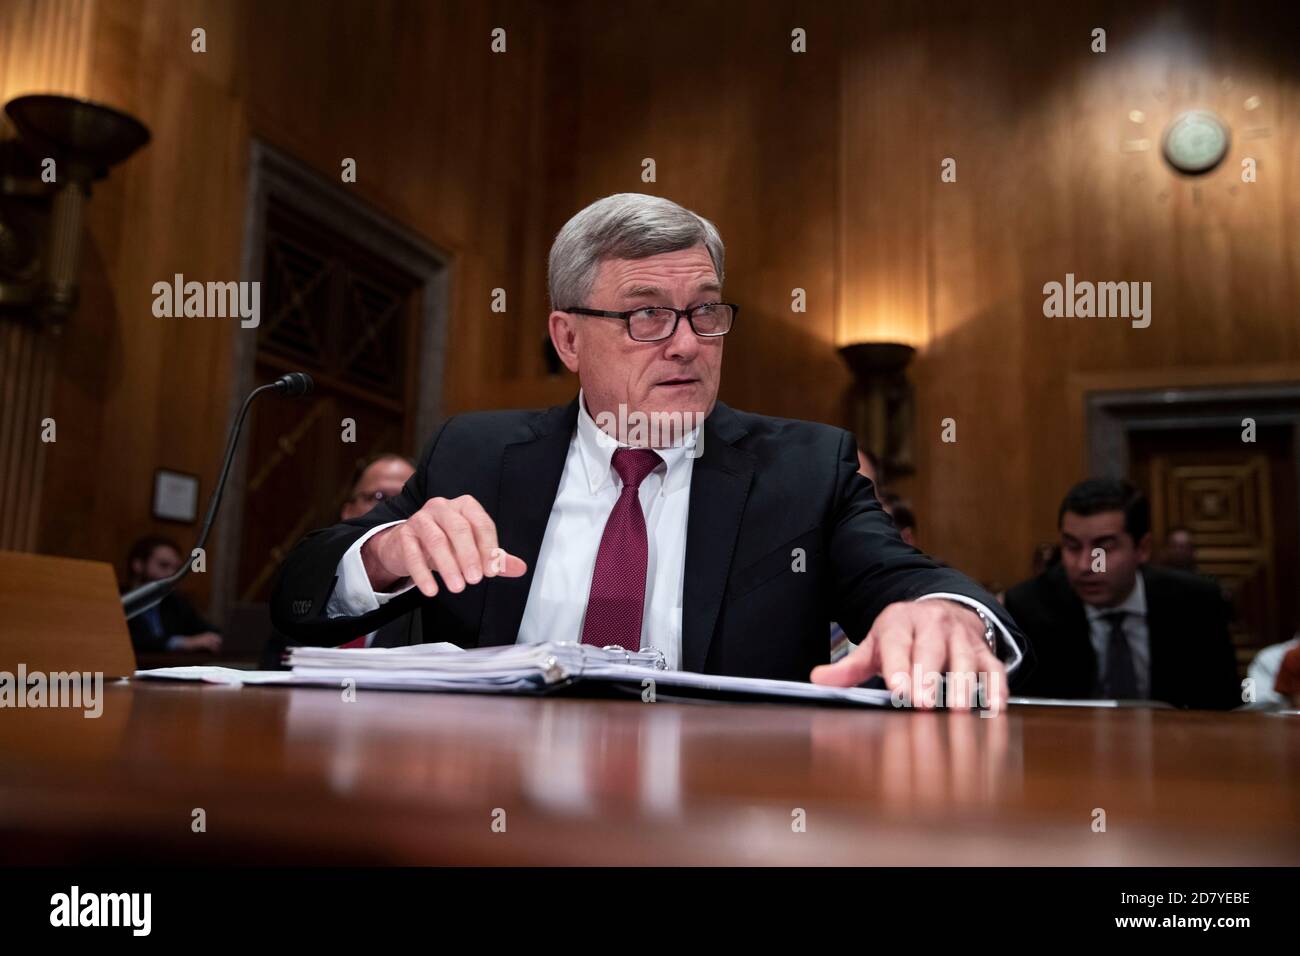 Steven Dillingham, Director, U.S. Census Bureau, prepares to testify during a hearing on the 2020 census before the Senate Homeland Security & Governmental Affairs Committee on Capitol Hill on Tuesday, July 16, 2019 in Washington, D.C. Dillingham briefed lawmakers on the upcoming 2020 census and the Census Bureaus efforts to address President Trump's efforts to add a 'citizenship' question to the 2020 survey. Credit: Alex Edelman/The Photo Access Stock Photo